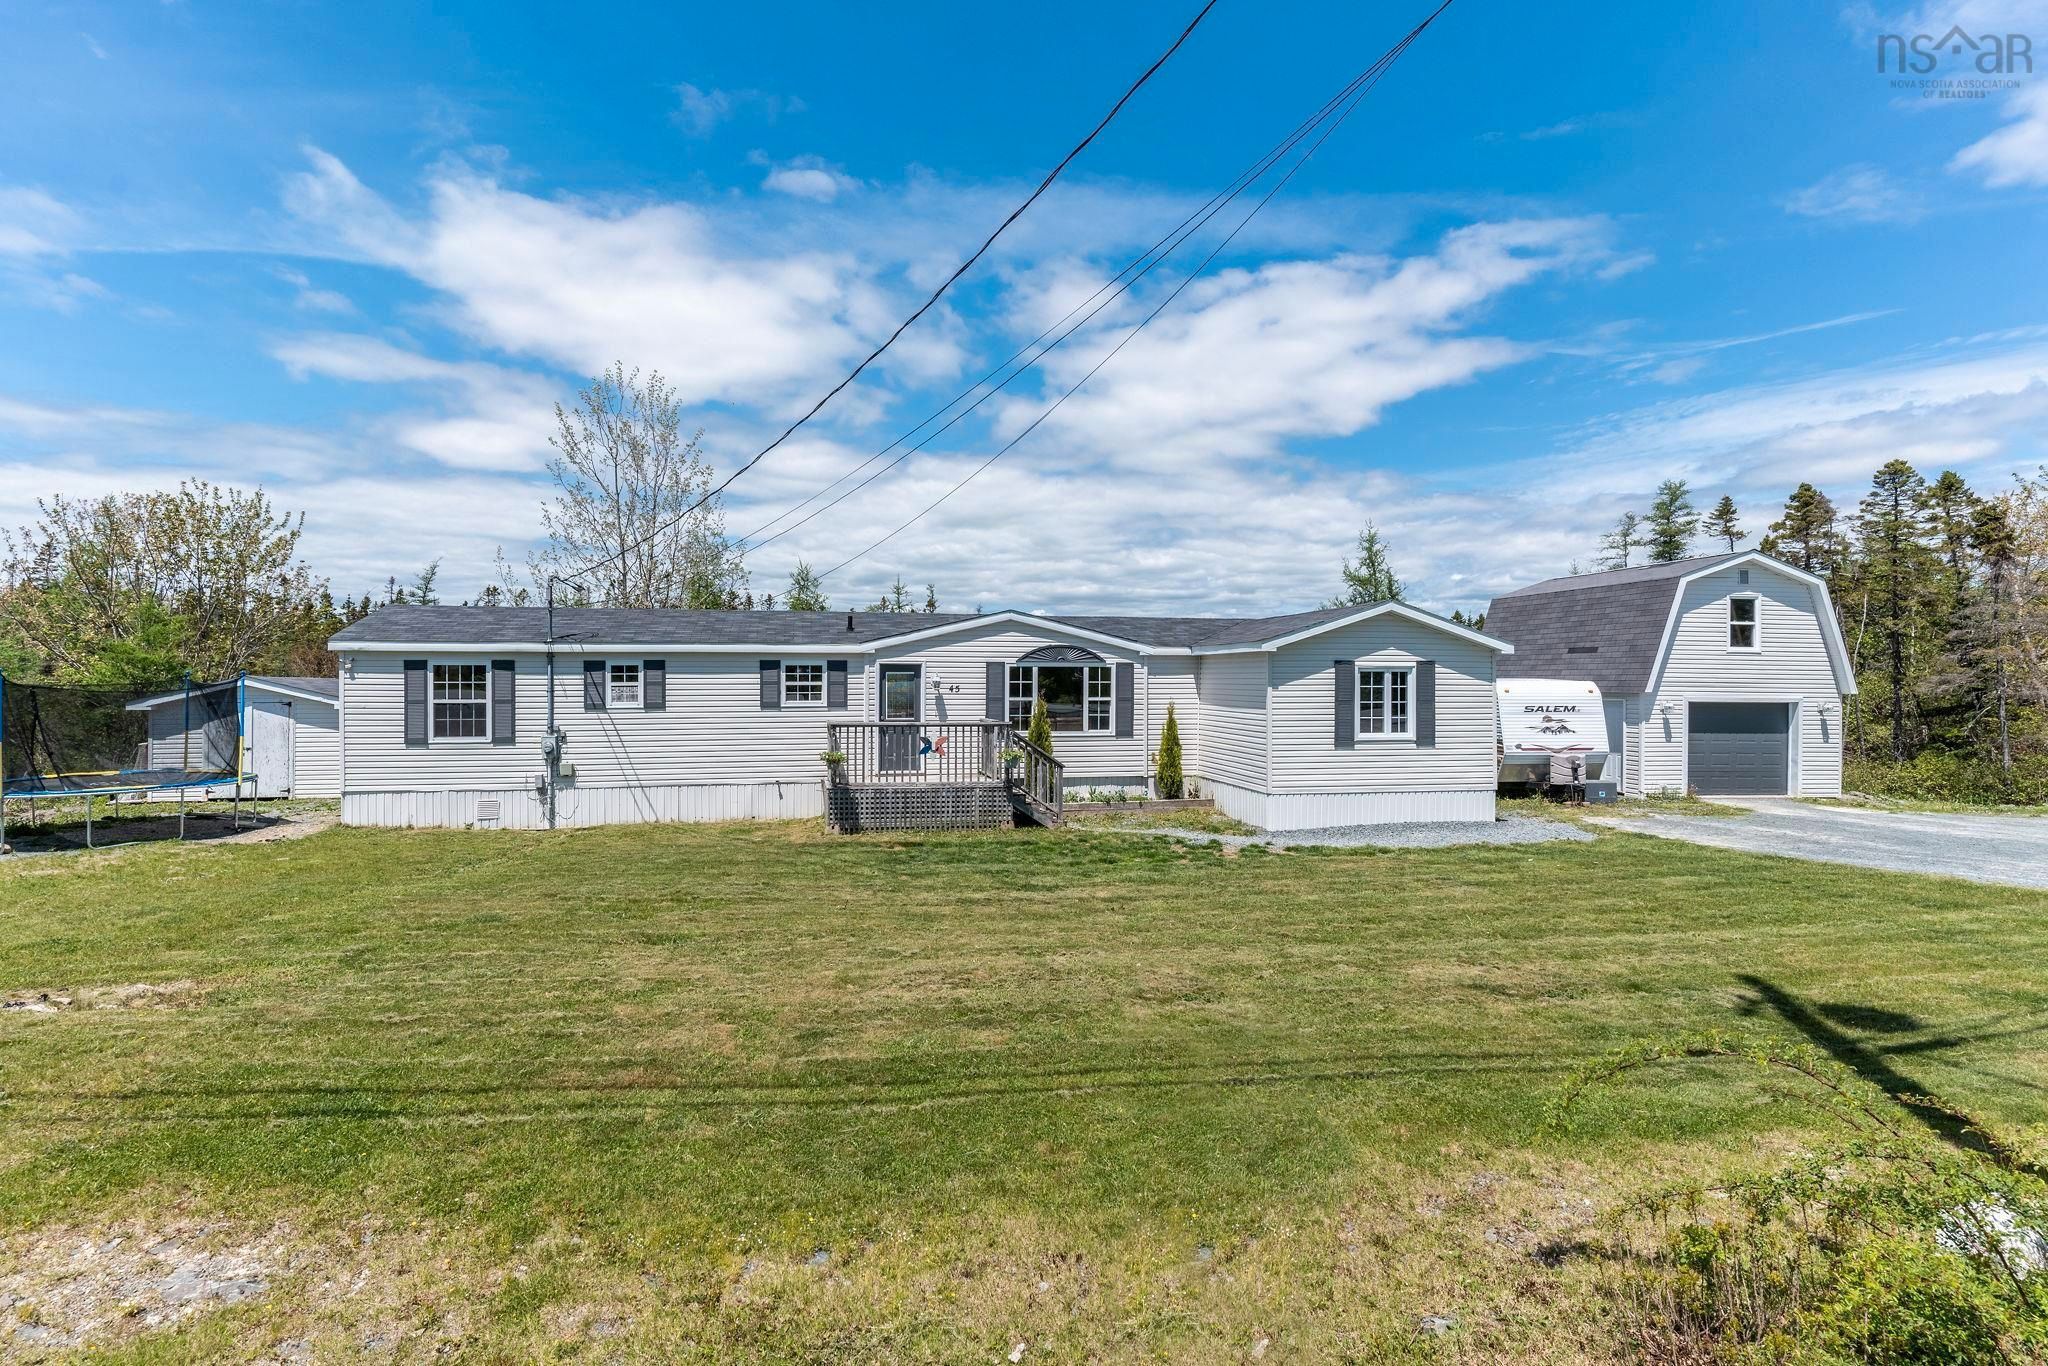 Main Photo: 45 Les Collins Avenue in West Chezzetcook: 31-Lawrencetown, Lake Echo, Port Residential for sale (Halifax-Dartmouth)  : MLS®# 202213046